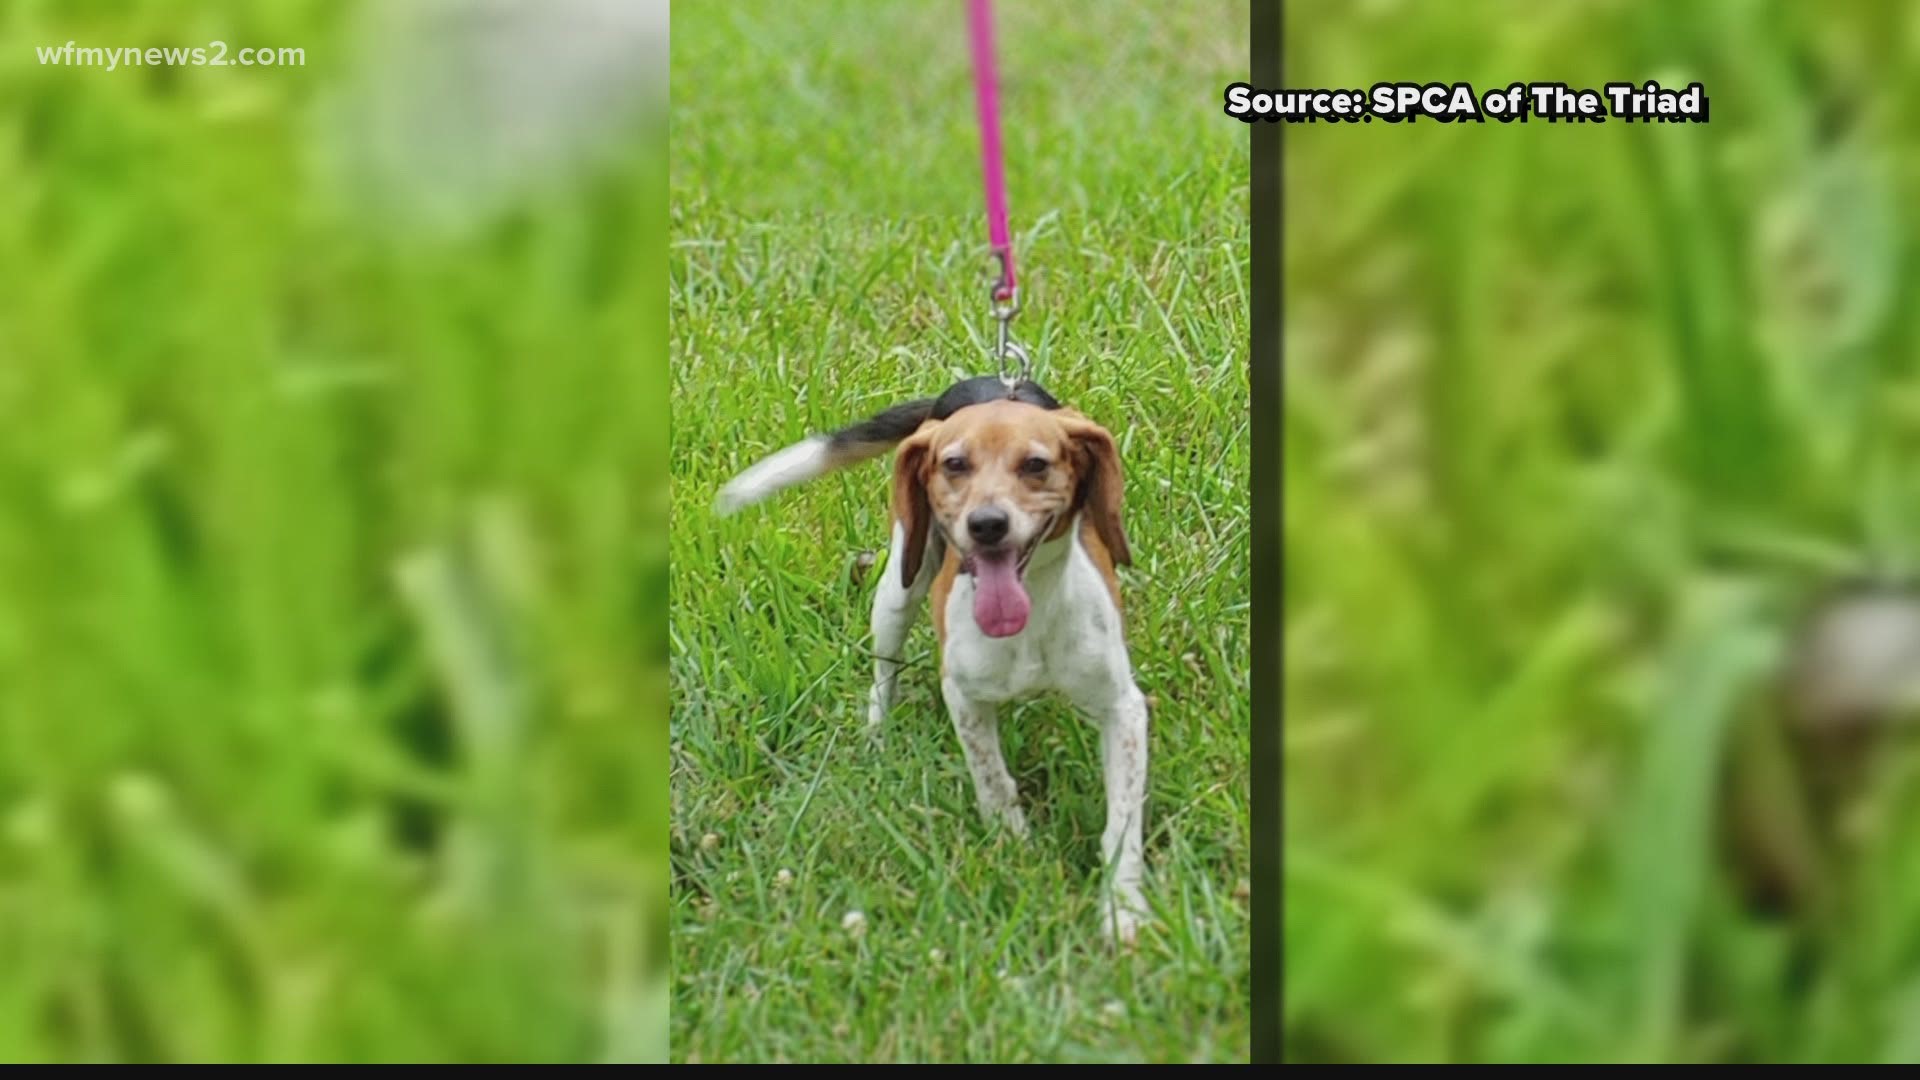 This sweet beagle mix is full of life and love.